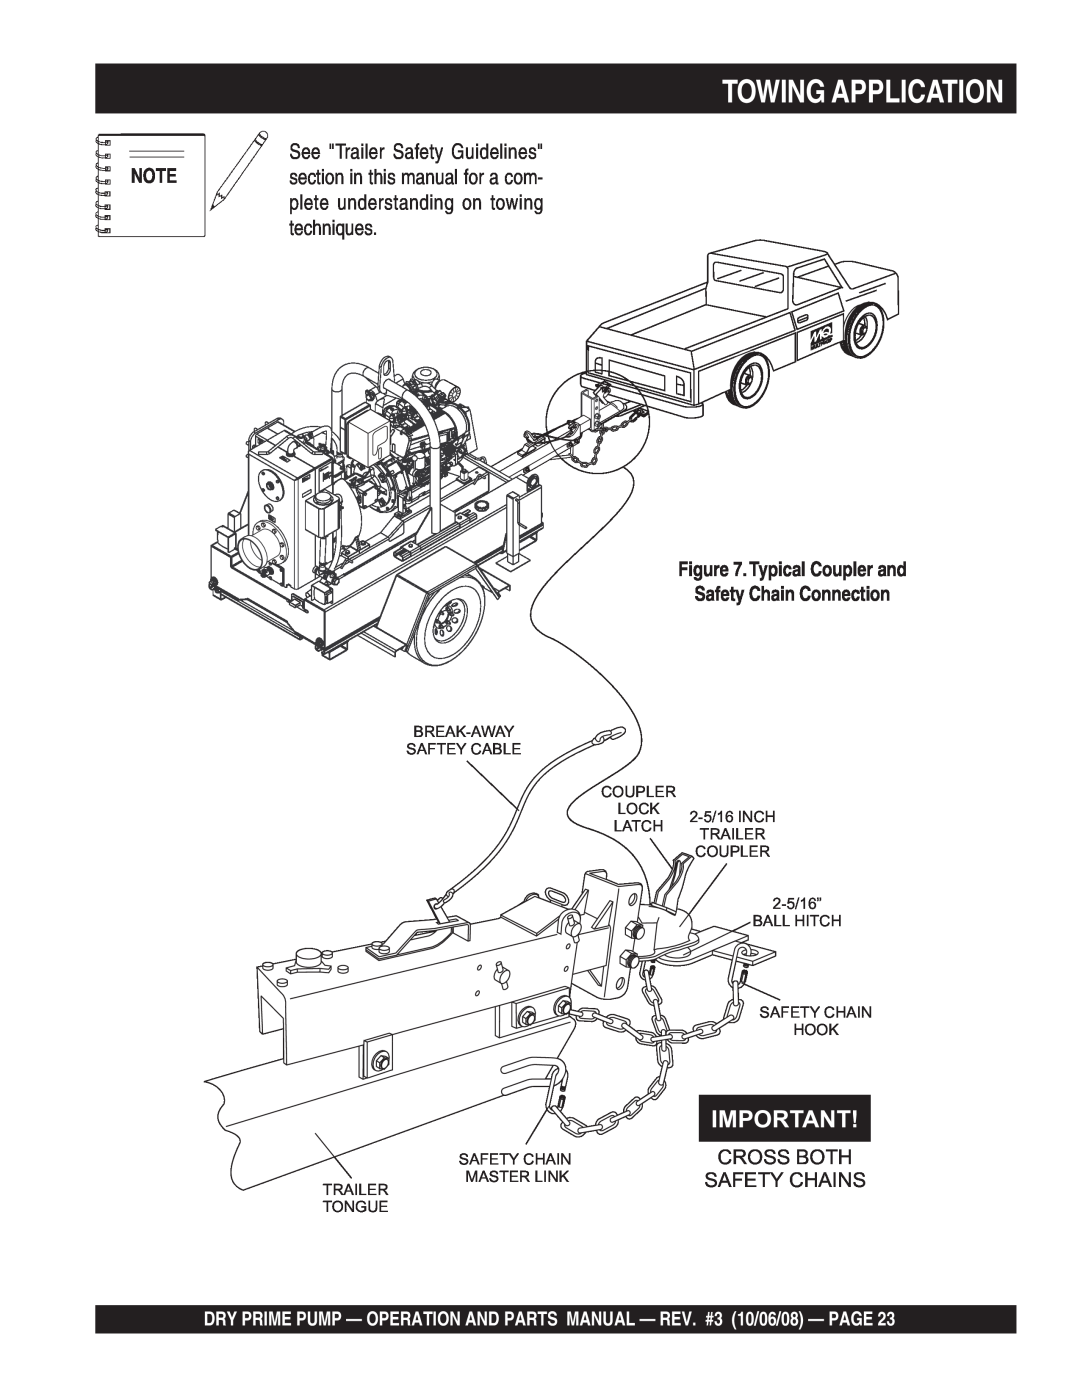 Multiquip MP200DLTS Towing Application, See Trailer Safety Guidelines, Typical Coupler and, Safety Chain Connection 